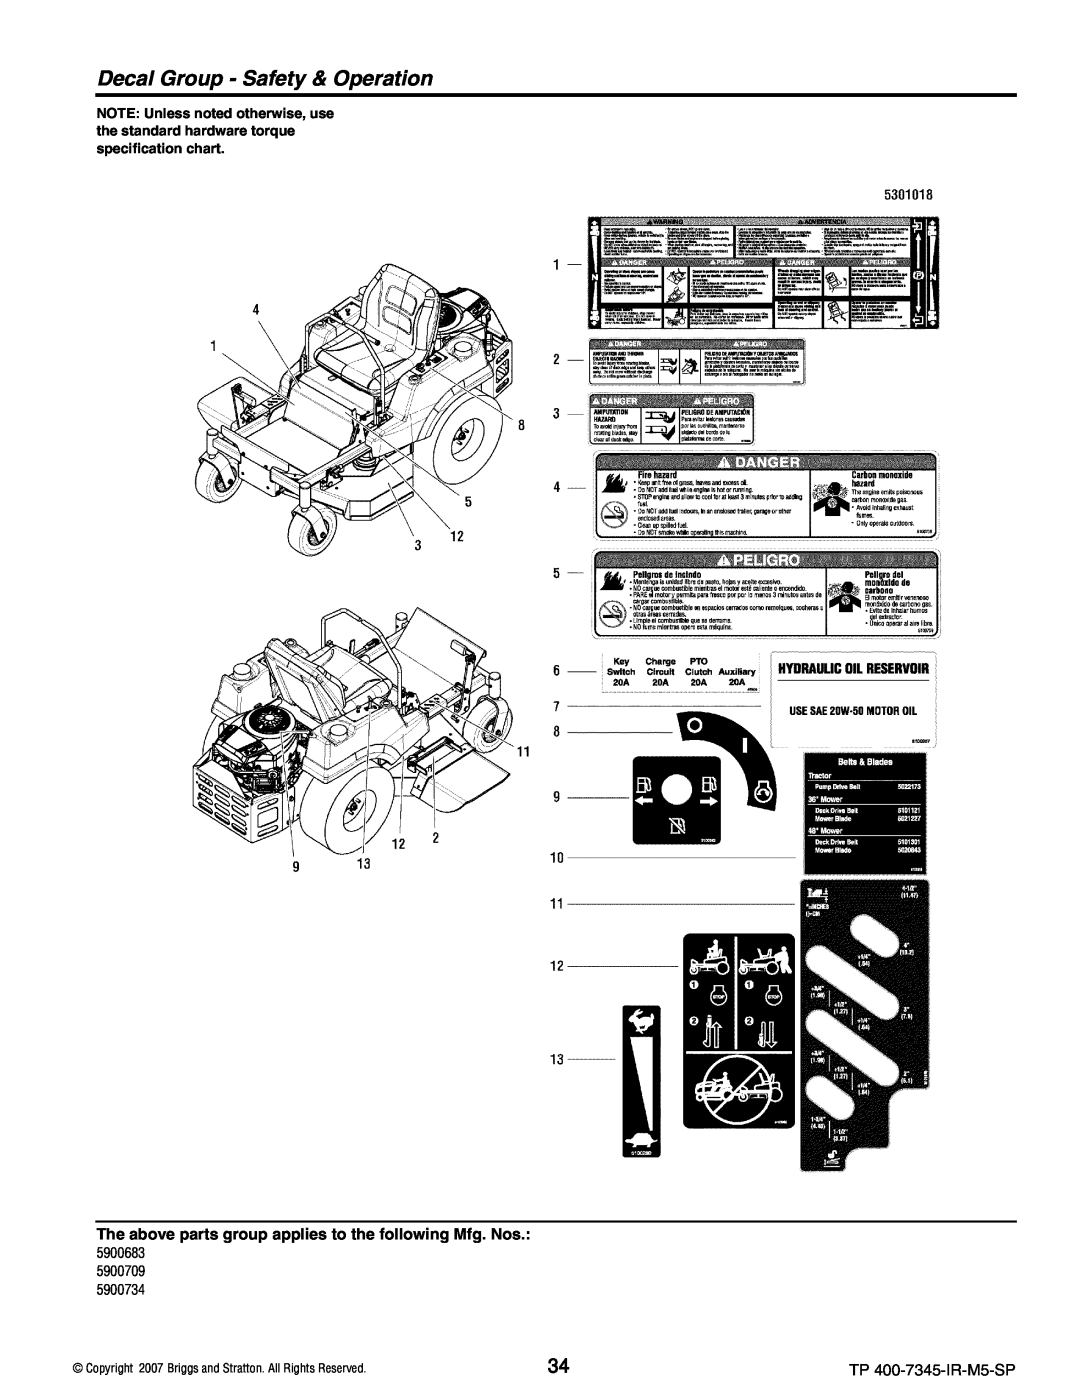 Briggs & Stratton 5900709, 5900734 manual Decal Group - Safety & Operation, 5900683, TP 400-7345-IR-M5-SP 